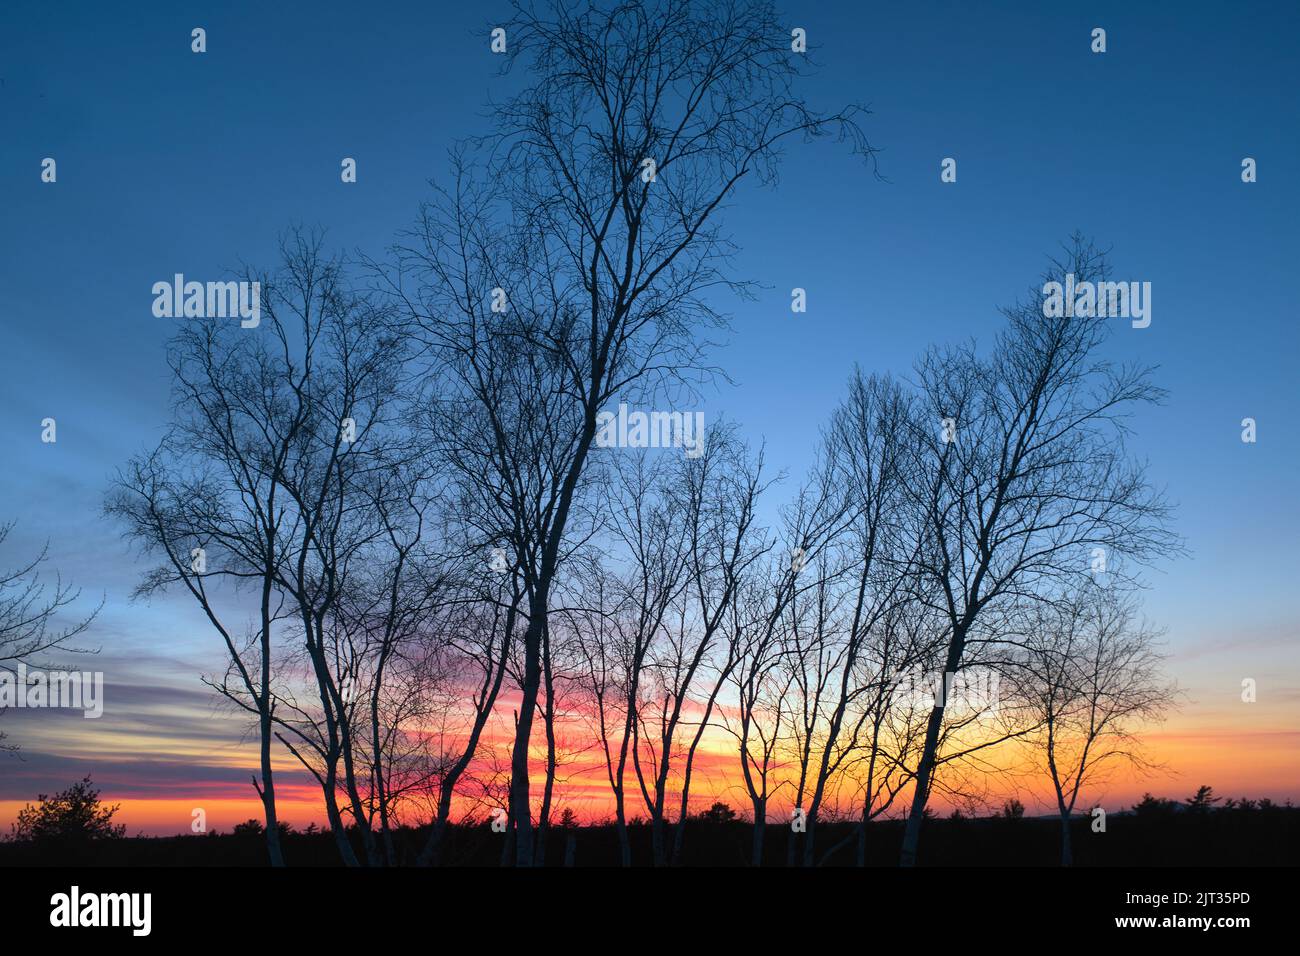 Silhouette of Bare Trees at Sunset Stock Photo